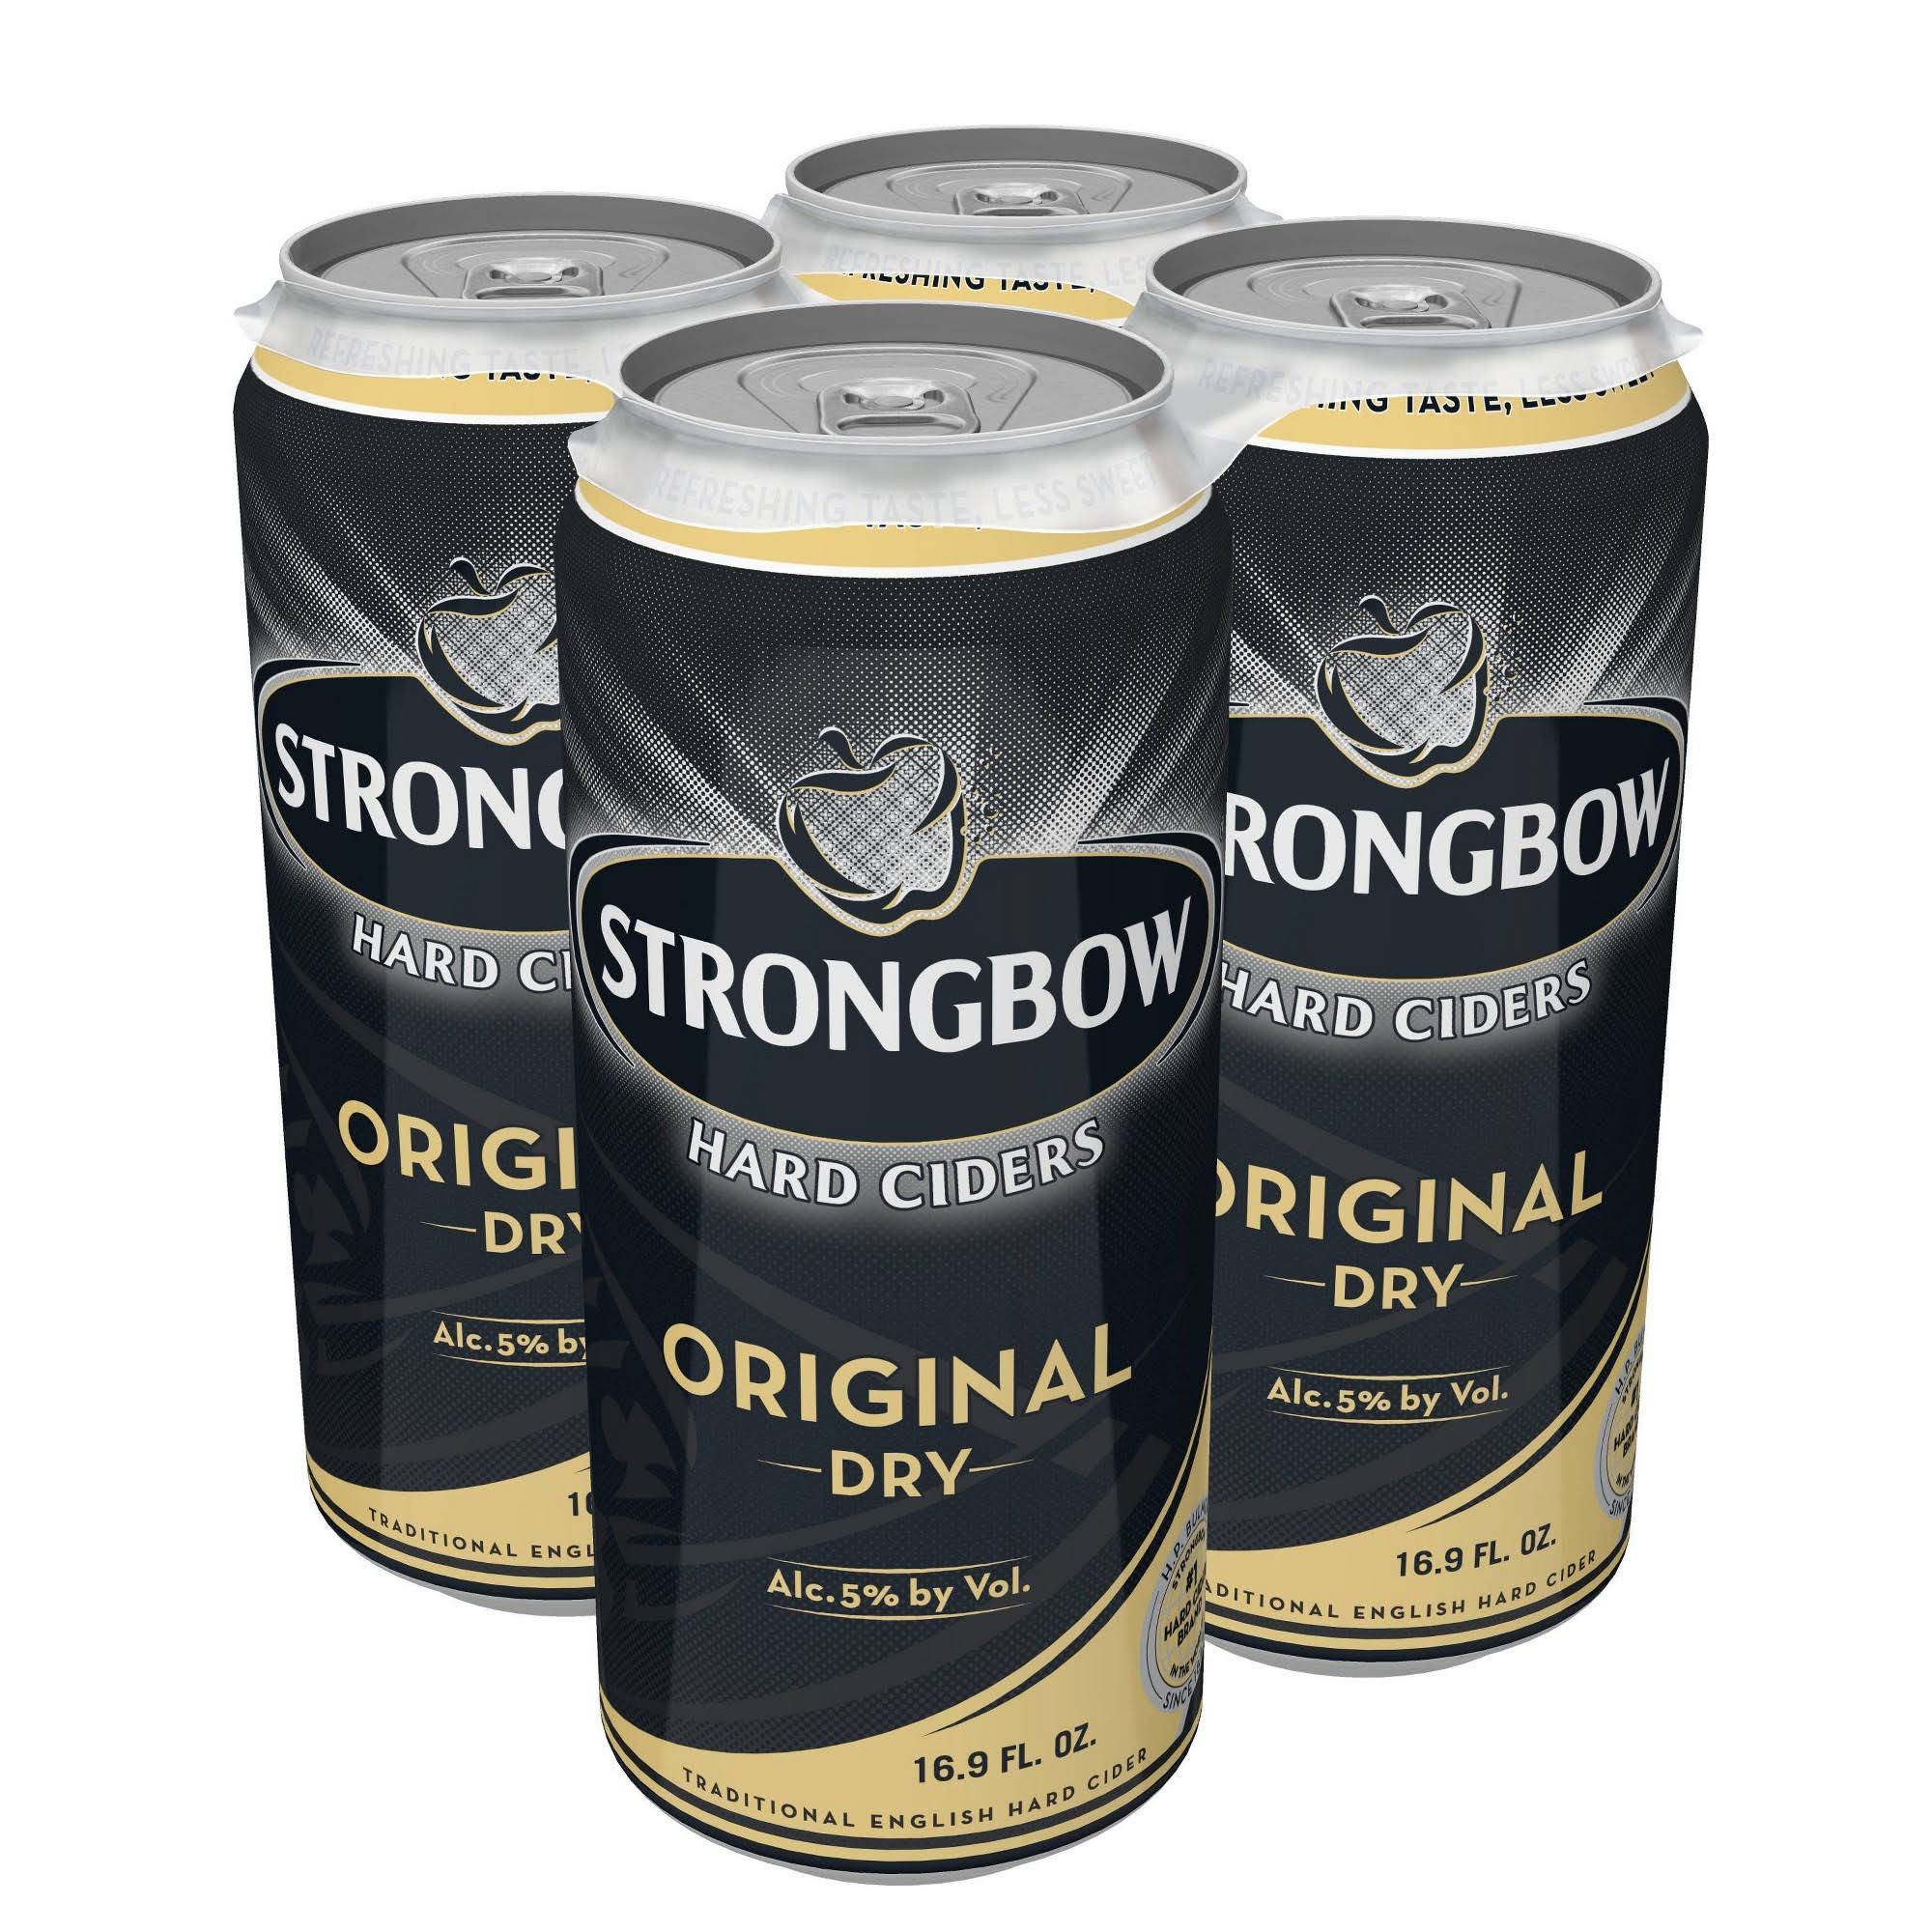 Strongbow Hard Ciders, Original - 4 pack, 16.9 fl oz cans